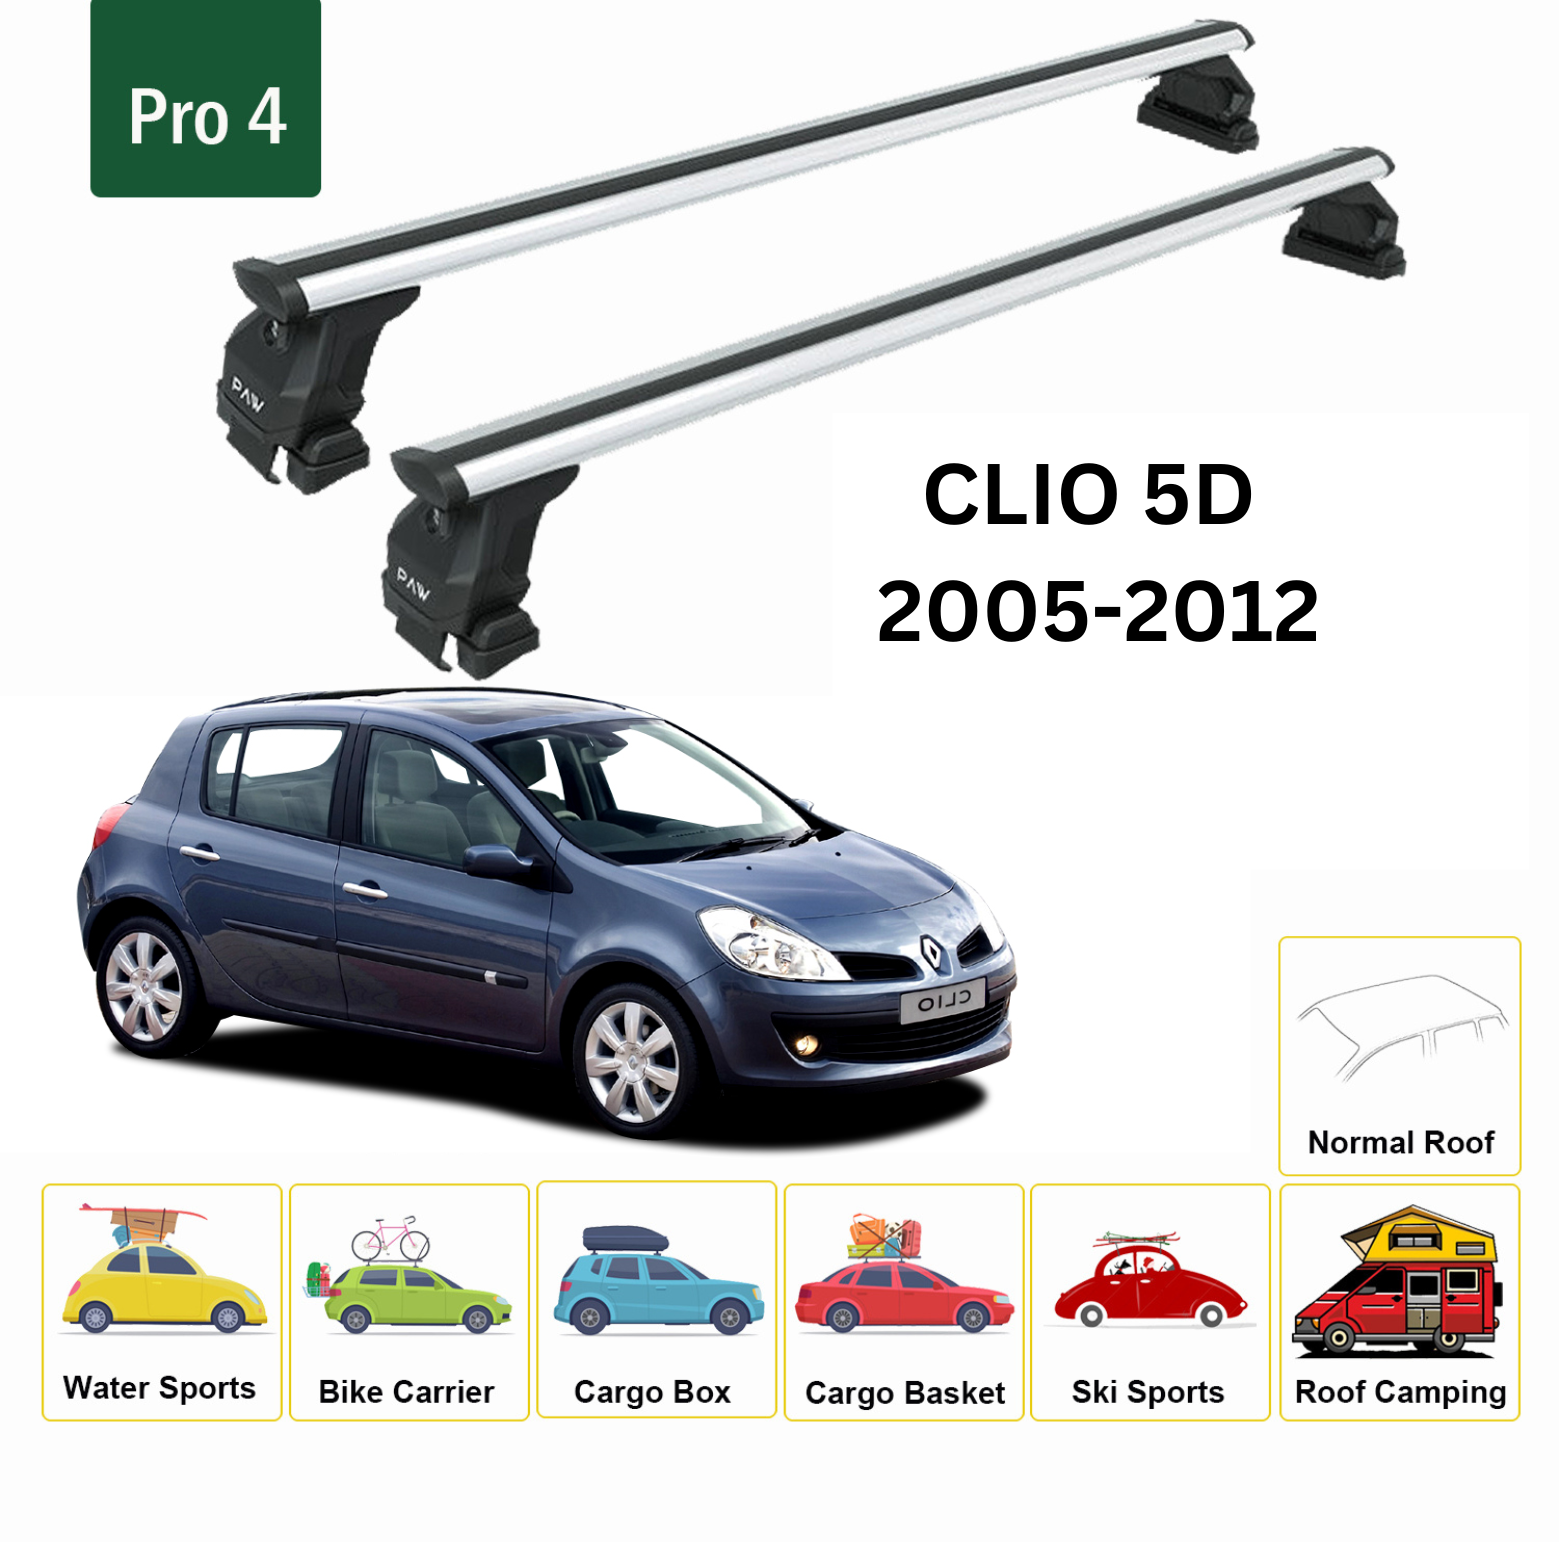 For Renault Clio 2005-2012 Roof Rack System, Aluminium Cross Bar, Metal Bracket, Normal Roof, Silver